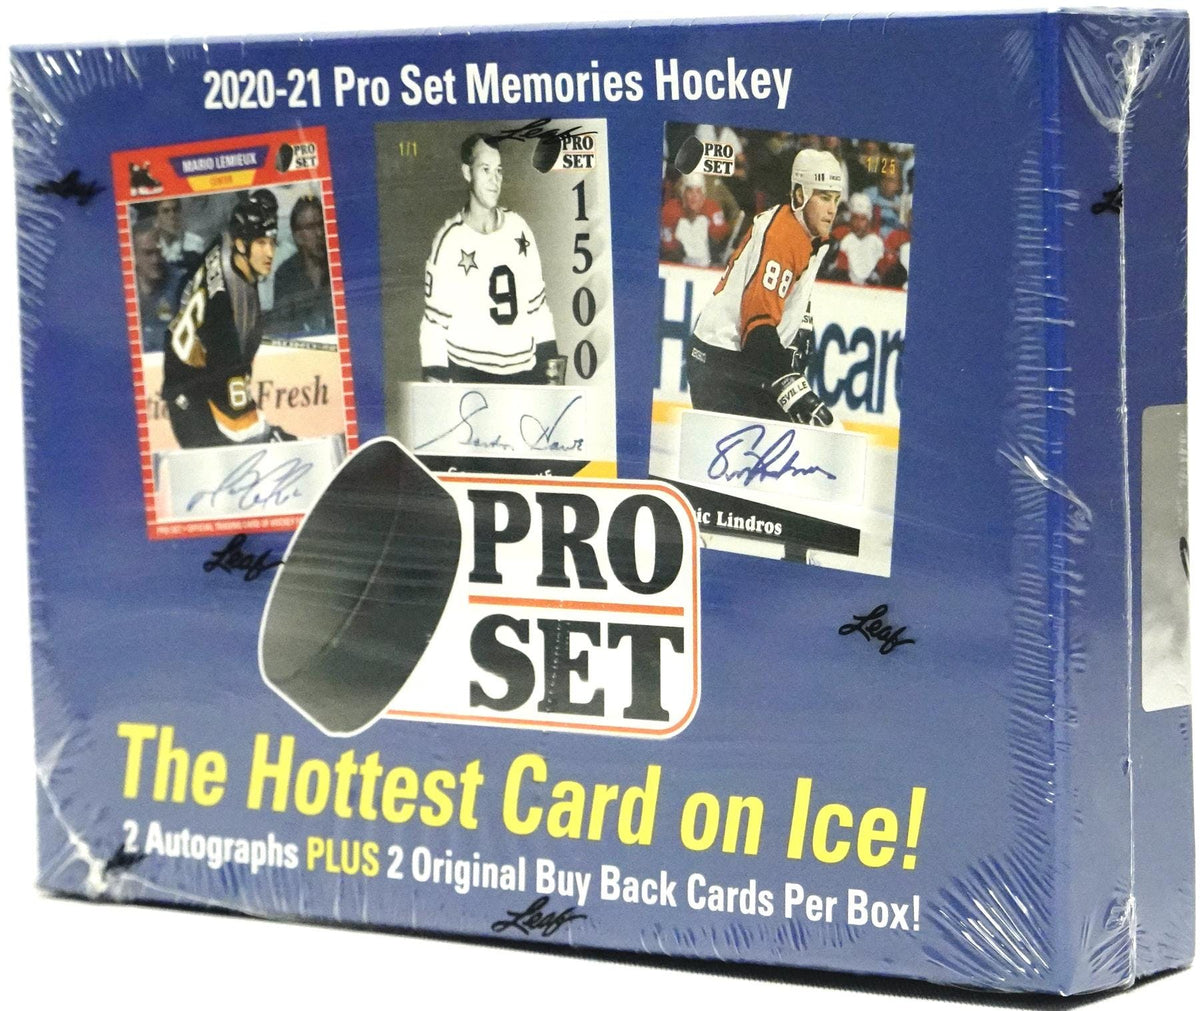 2020/21 Leaf Pro Set Memories Hockey Hobby Box with 1 Holiday pack